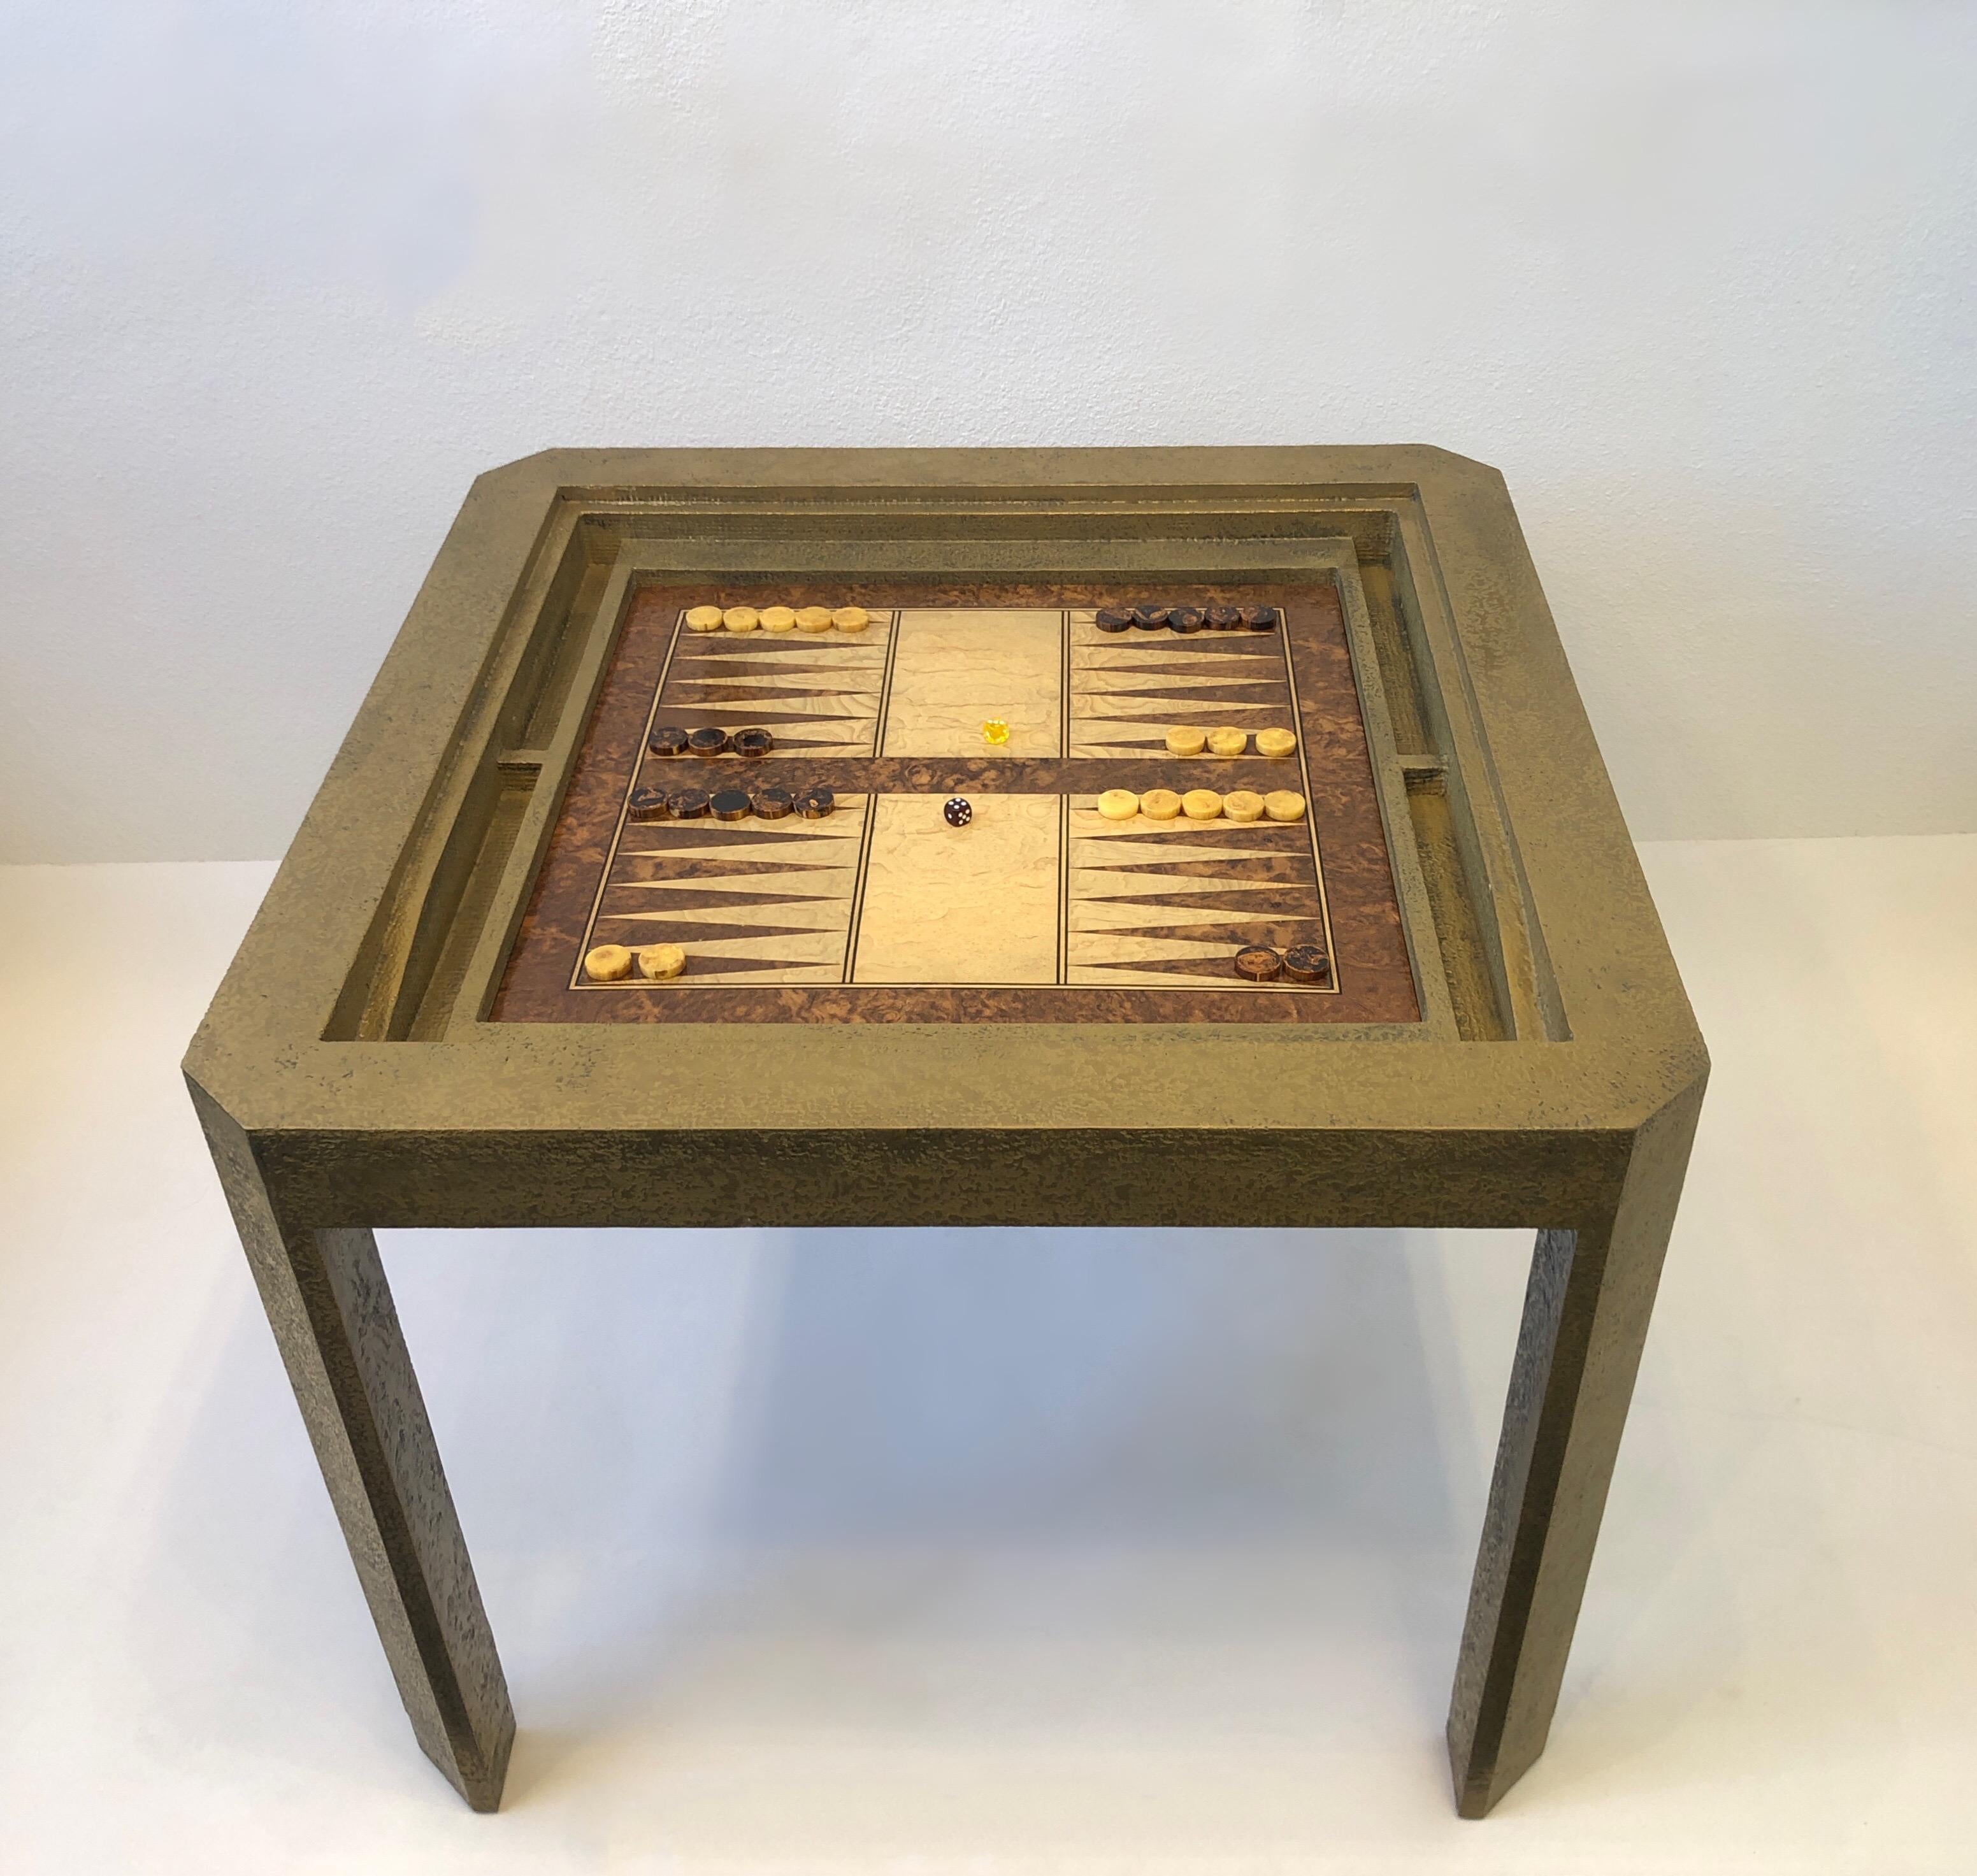 Glamorous Brutalist brass and burlwood game table by Steve Chase. 
Constructed of wood covered with aged brass texture finish.
The game board is lite and dark burlwood with one side for backgammon and other side for chess. 
It also has a cover, so